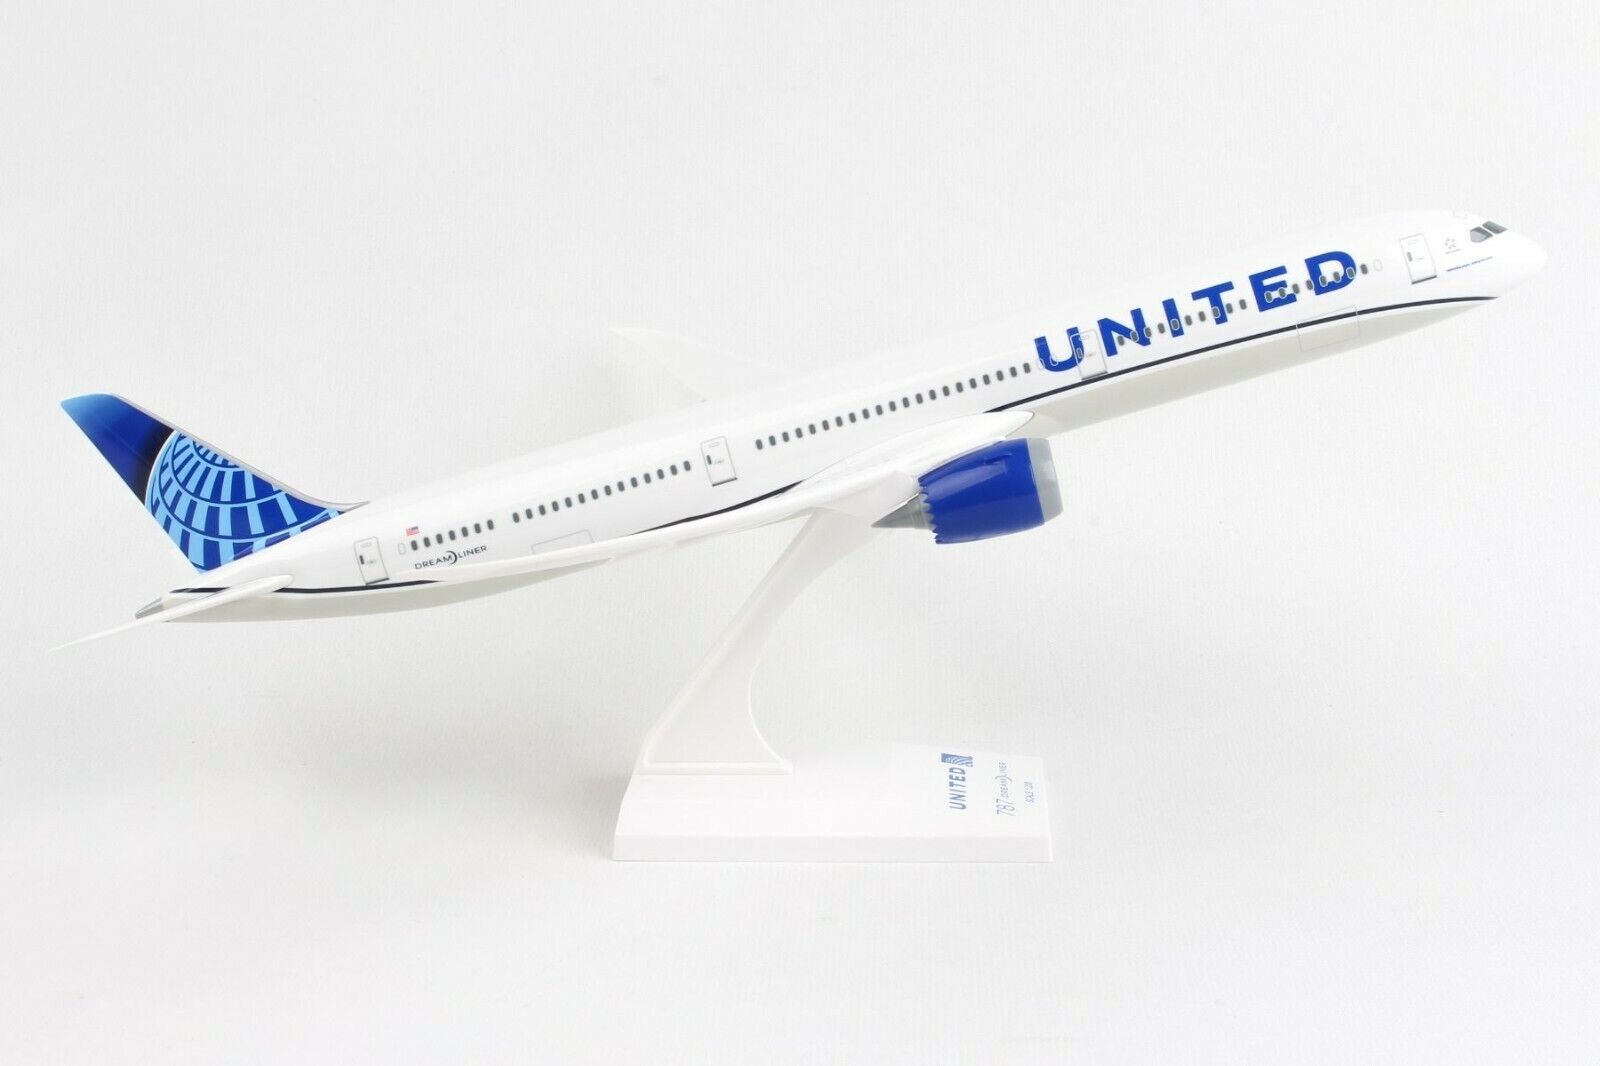 Skymarks 1050 United Airlines 2019 Livery Boeing 787-10 1/200 Scale with Stand